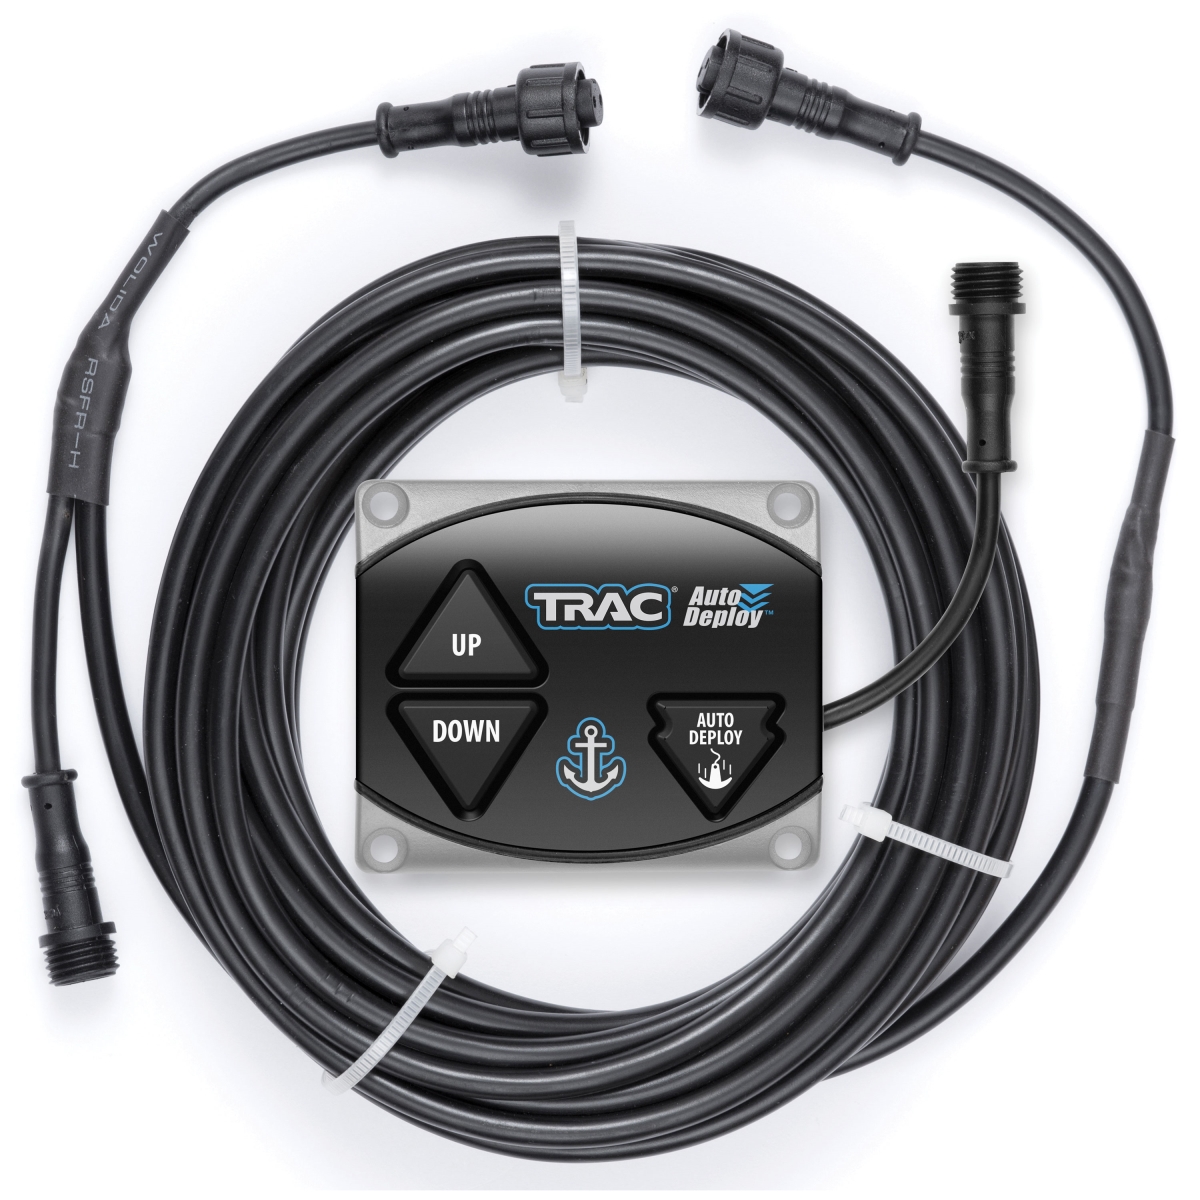 TRAC Outdoor s 3004.7507 T10217 Trac G3 Anchor Winch Auto Deploy